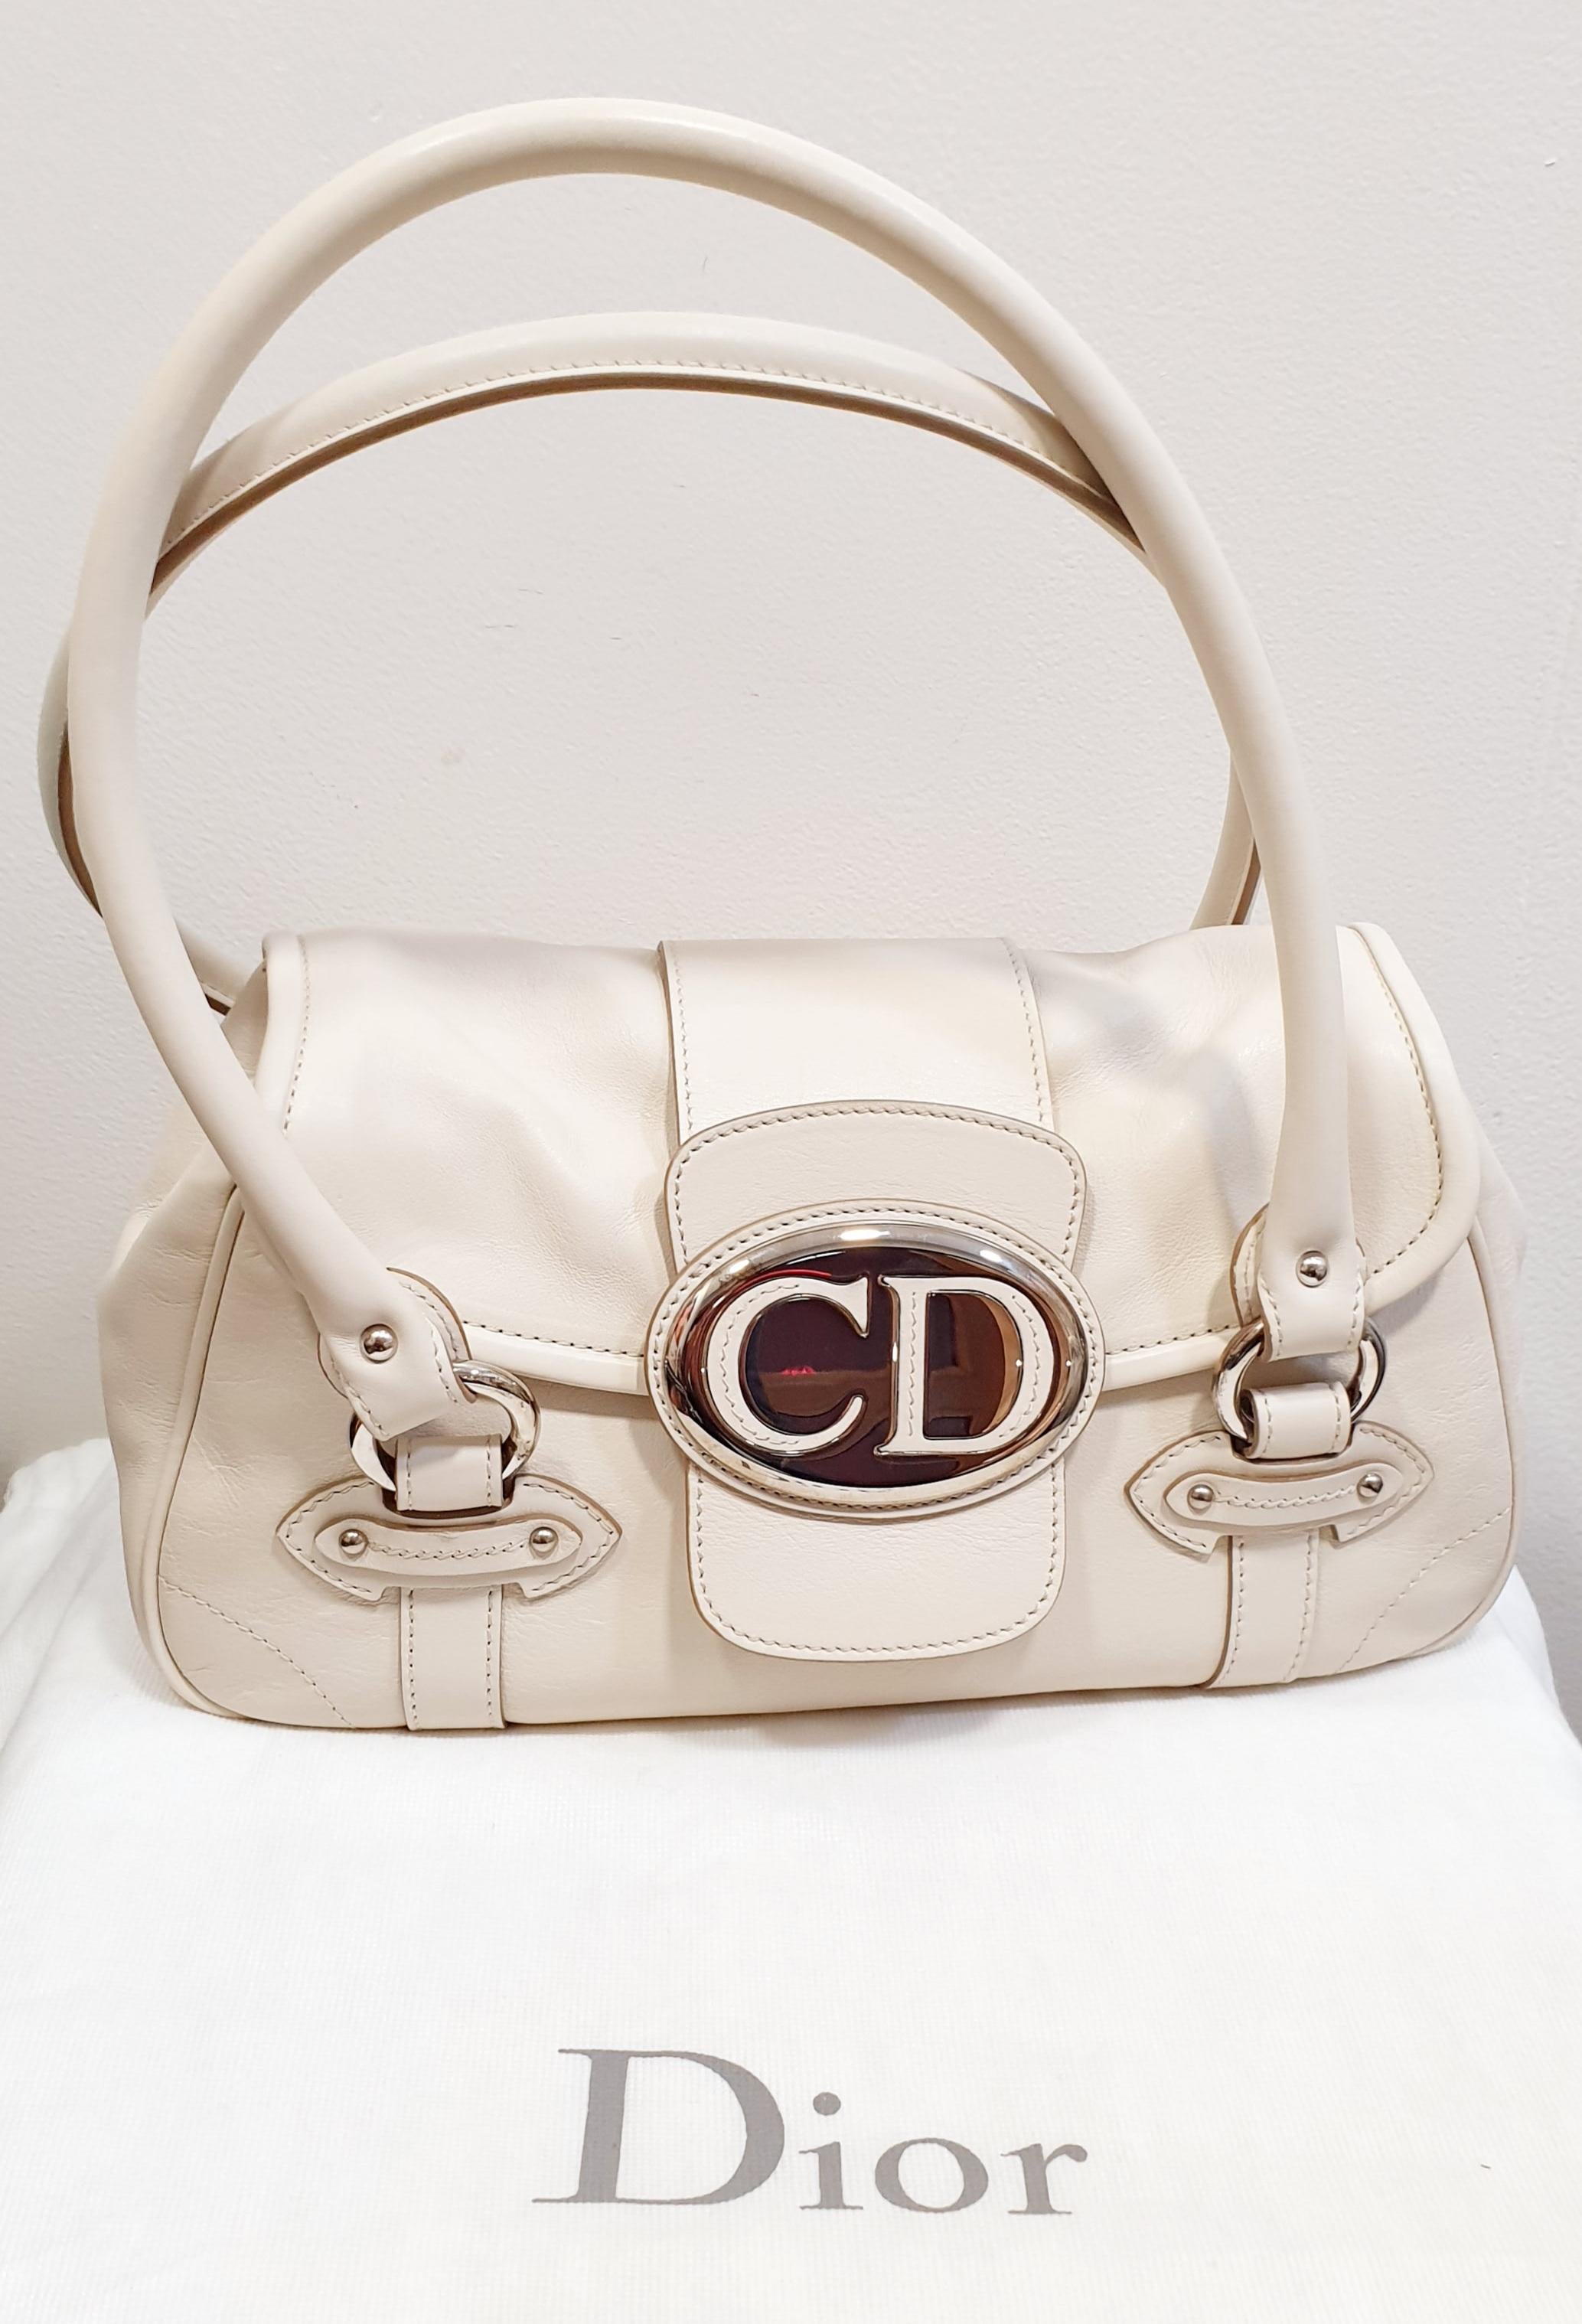 This Christian Dior bag is made with white leather , large CD logo plaque in sliver tone on the front, silver-tone hardware accents, snap closure and a light brown diorissimo fabric-lined interior with a zipped pocket.

Designer Christian Dior
Brand